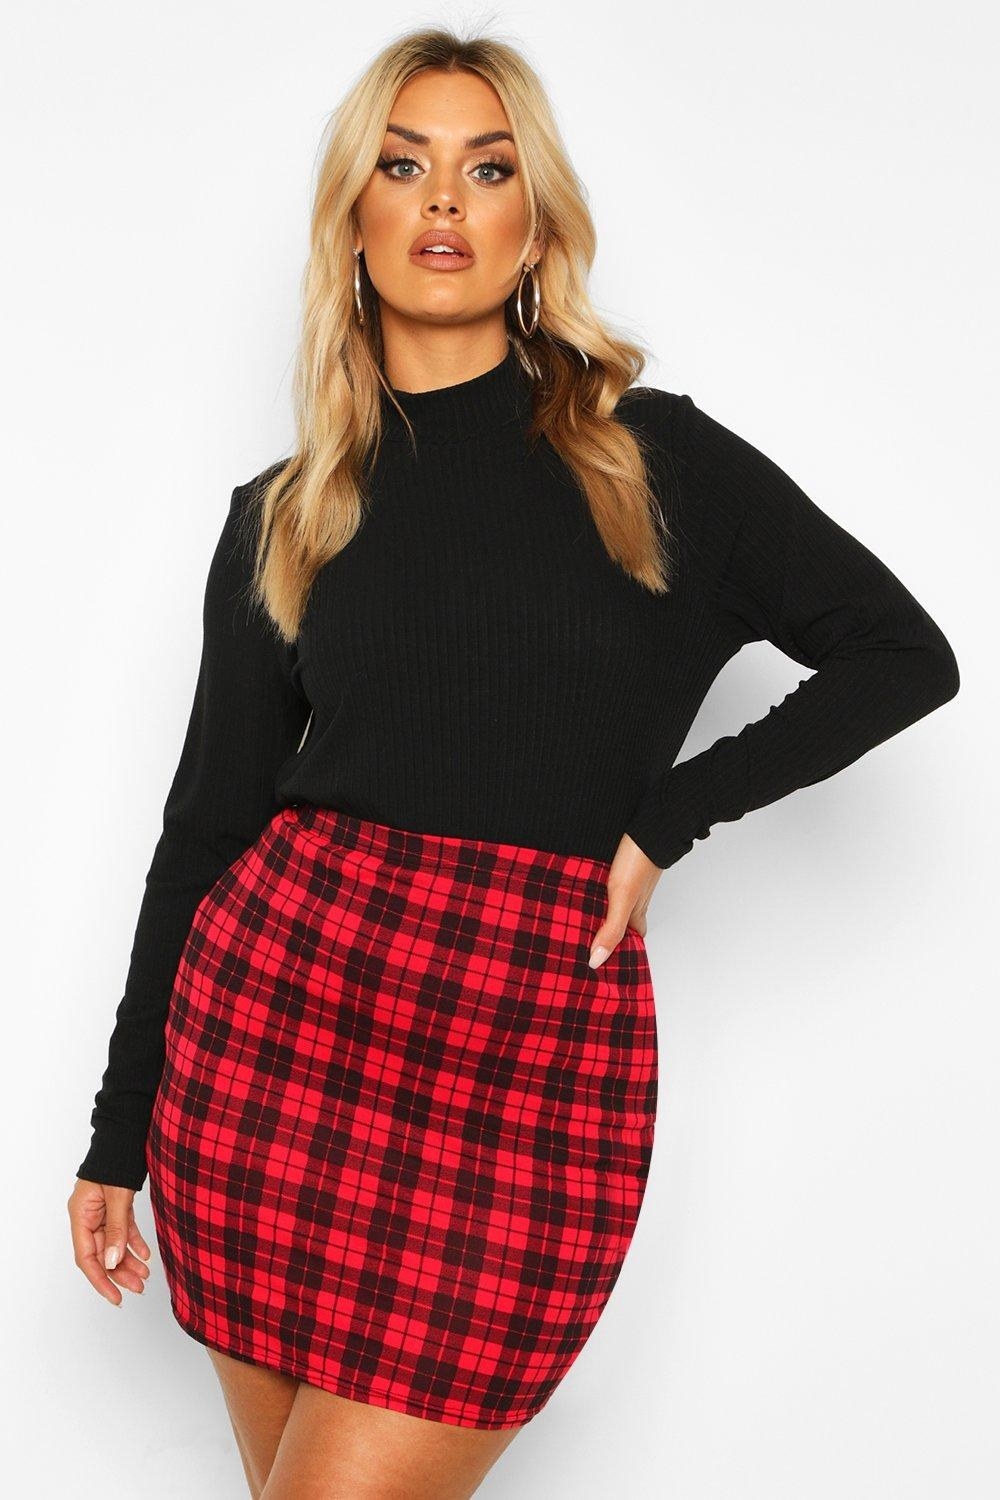 Model is wearing a black long sleeve top and a red and black plaid mini skirt